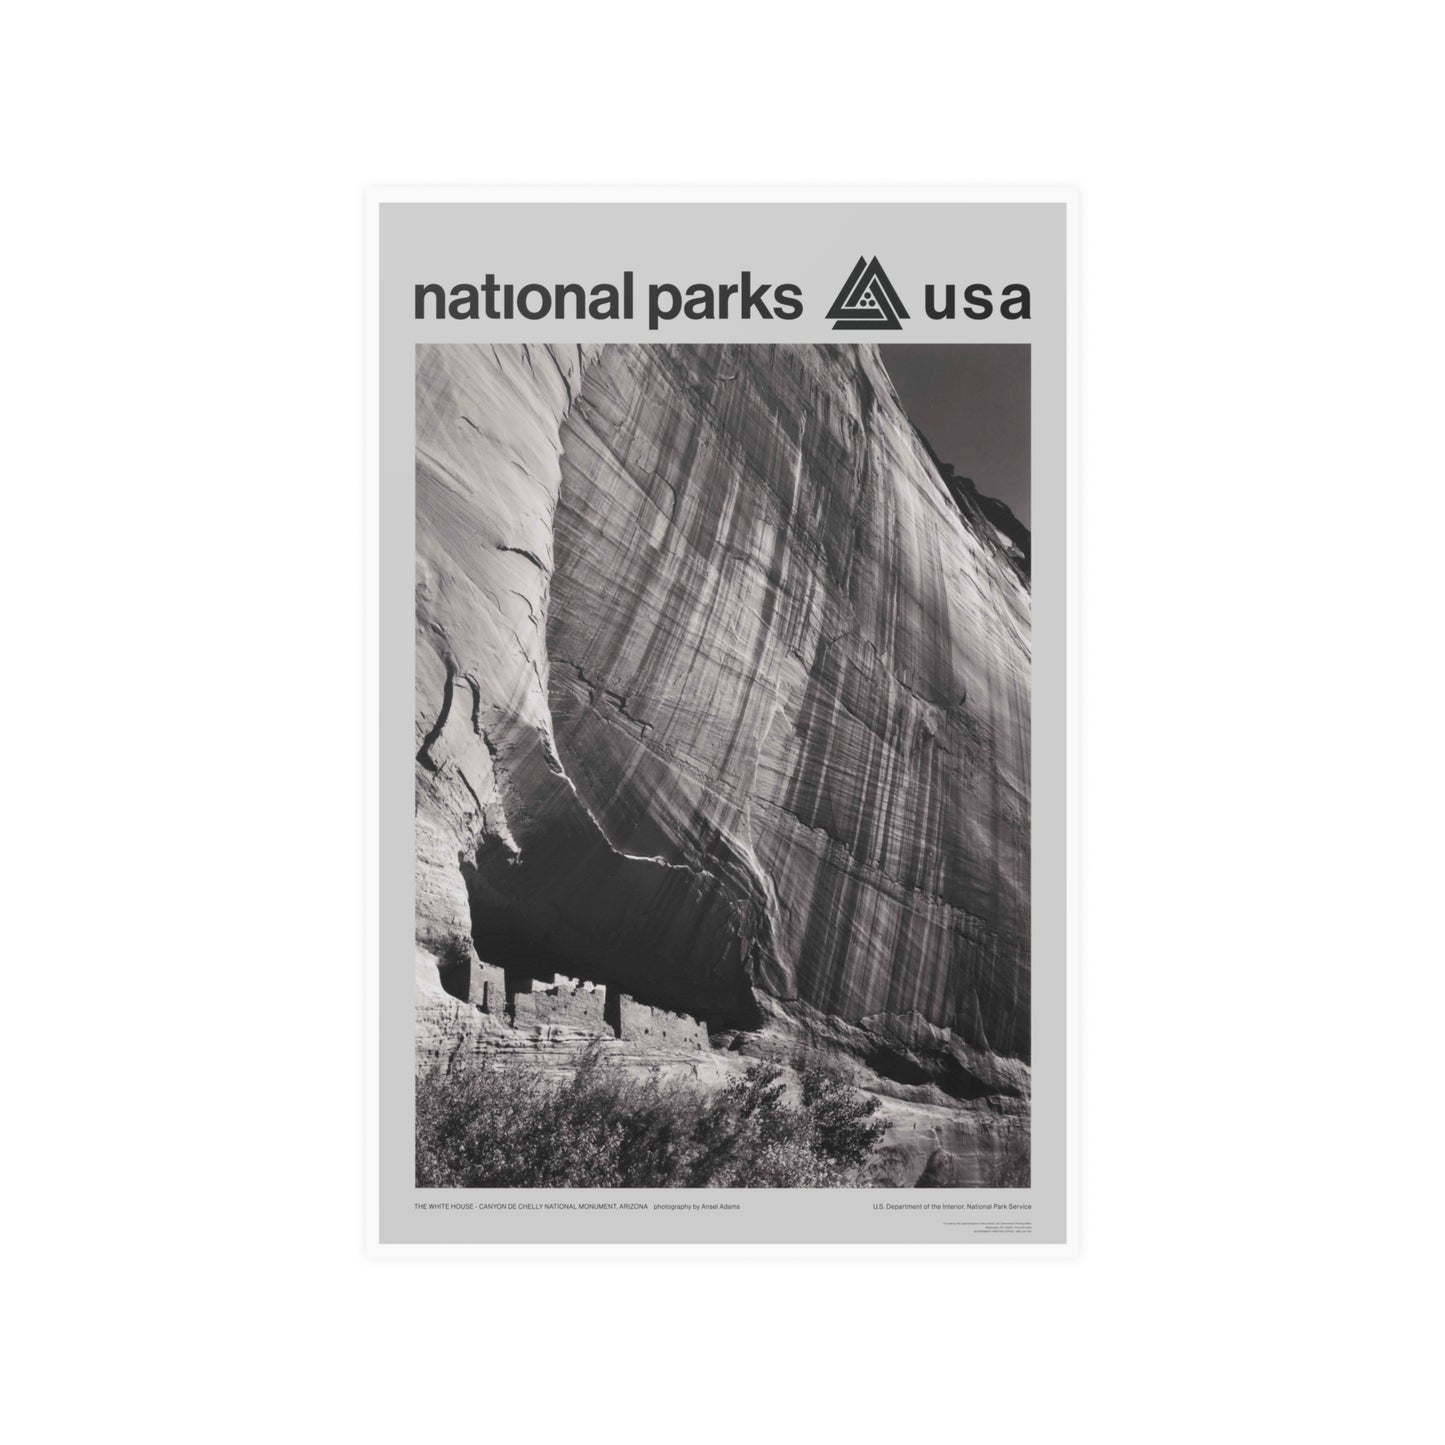 Canyon De Chelly National Monument Poster - Ansel Adams